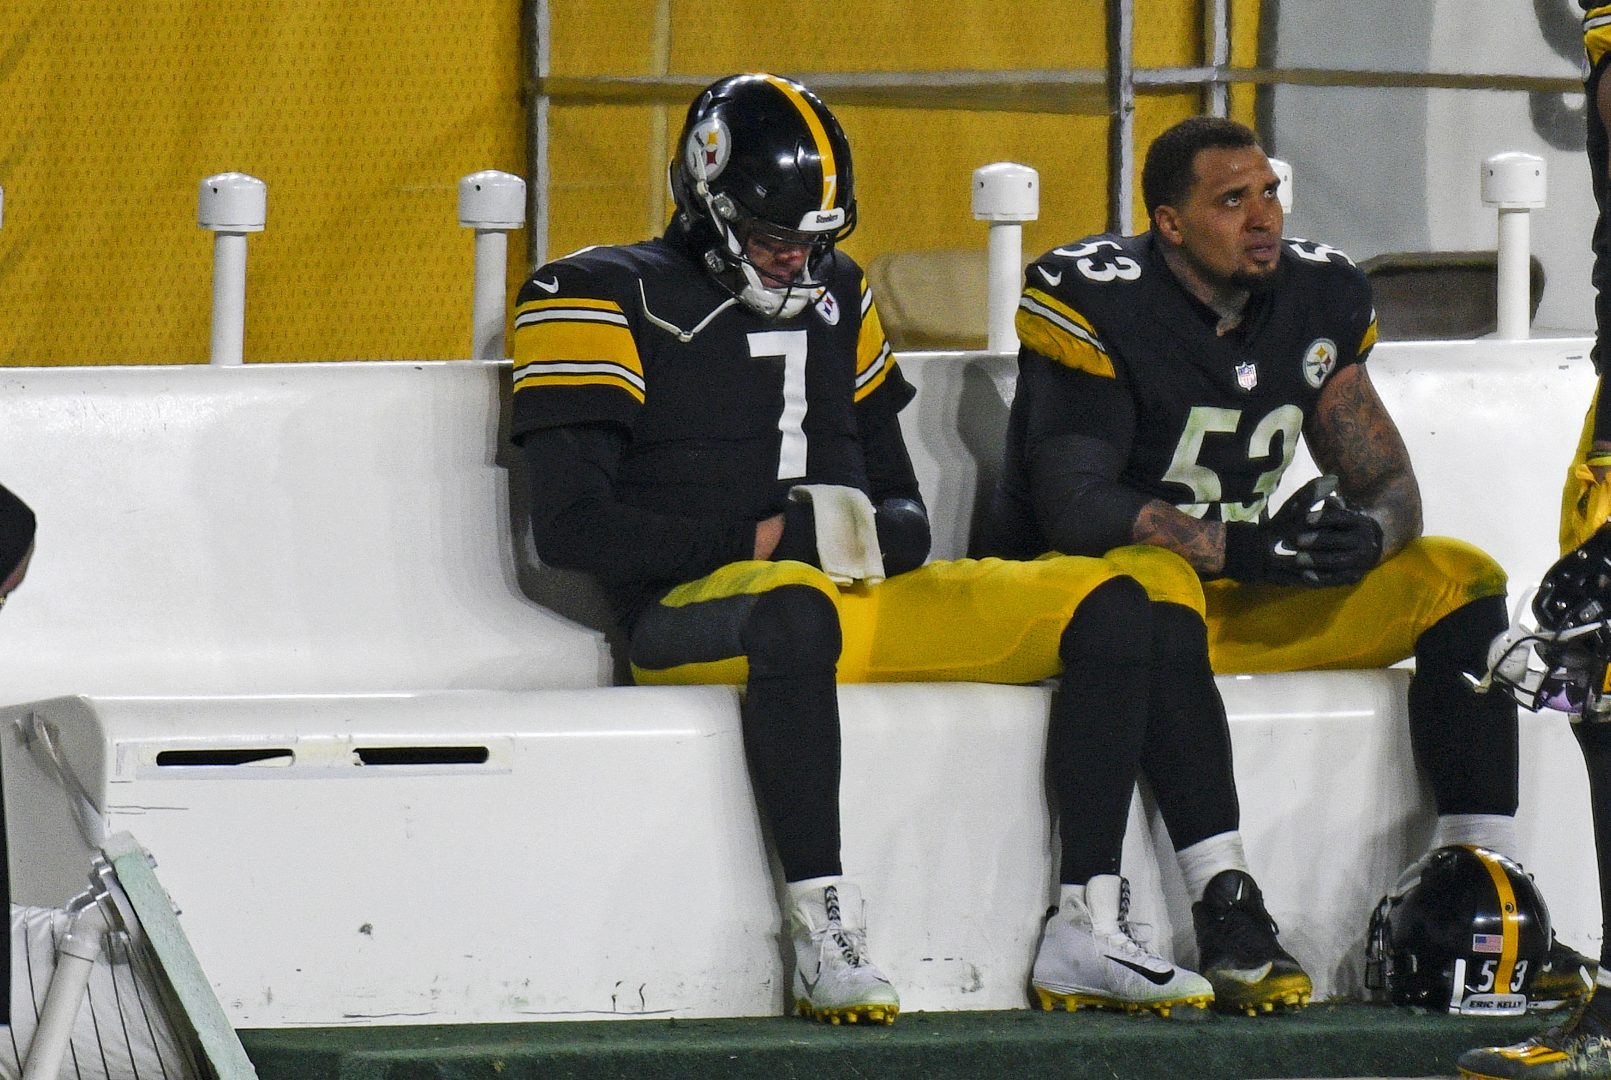 Pittsburgh Steelers quarterback Ben Roethlisberger (7) sits on the bench next to center Maurkice Pouncey (53) following a 48-37 loss to the Cleveland Browns in an NFL wild-card playoff football game in Pittsburgh, Sunday, Jan. 10, 2021. 